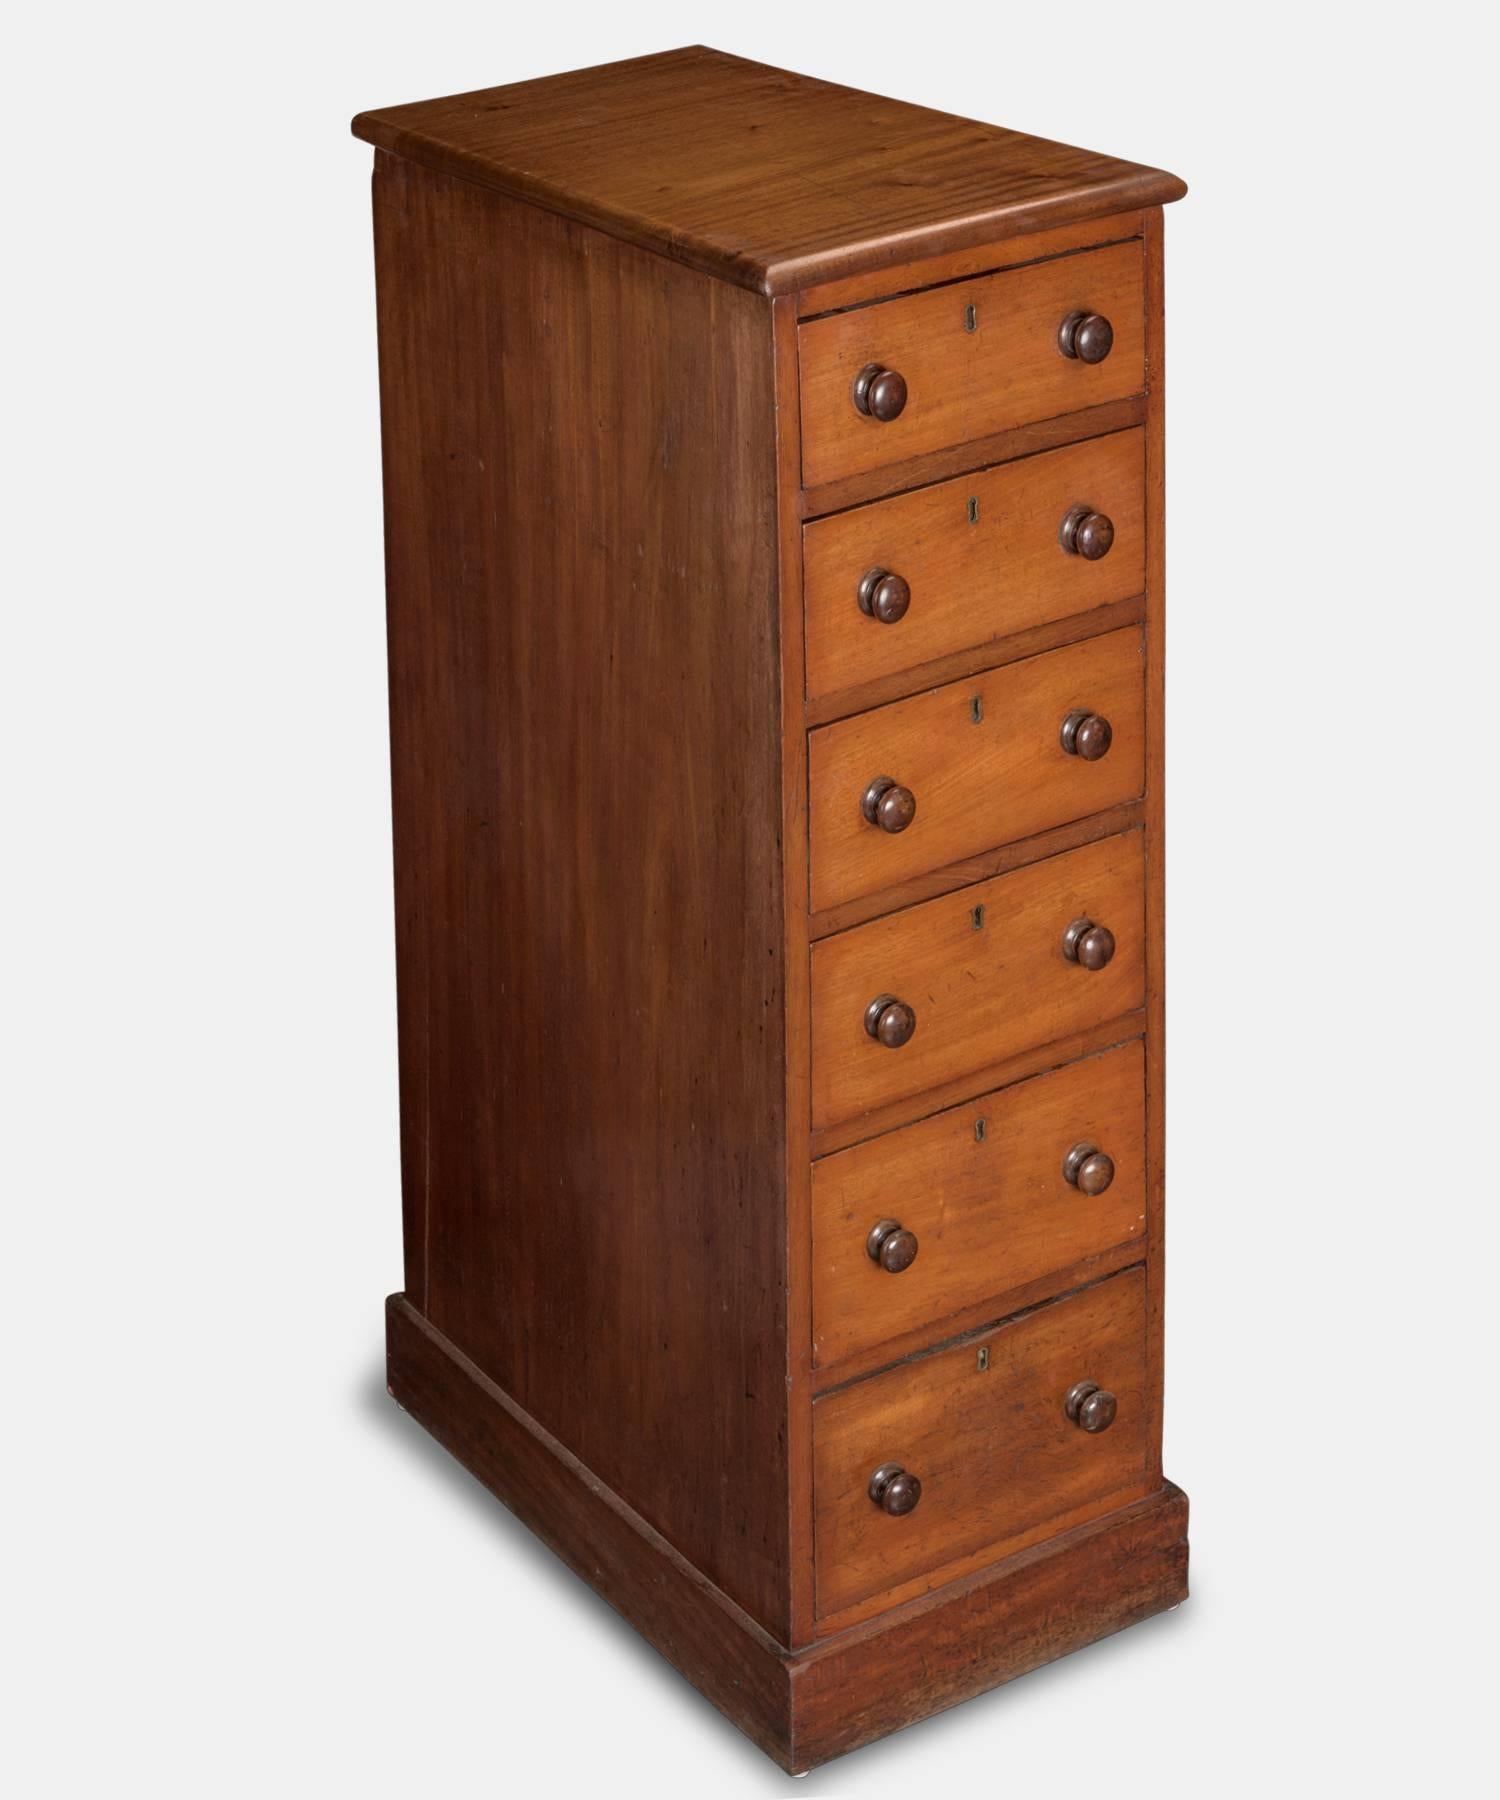 Tall Mahogany Chest of Drawers, England, circa 1870

Period turned wooden knobs, standing on square plinths with paneled backs. Drawers lined in ashwood.